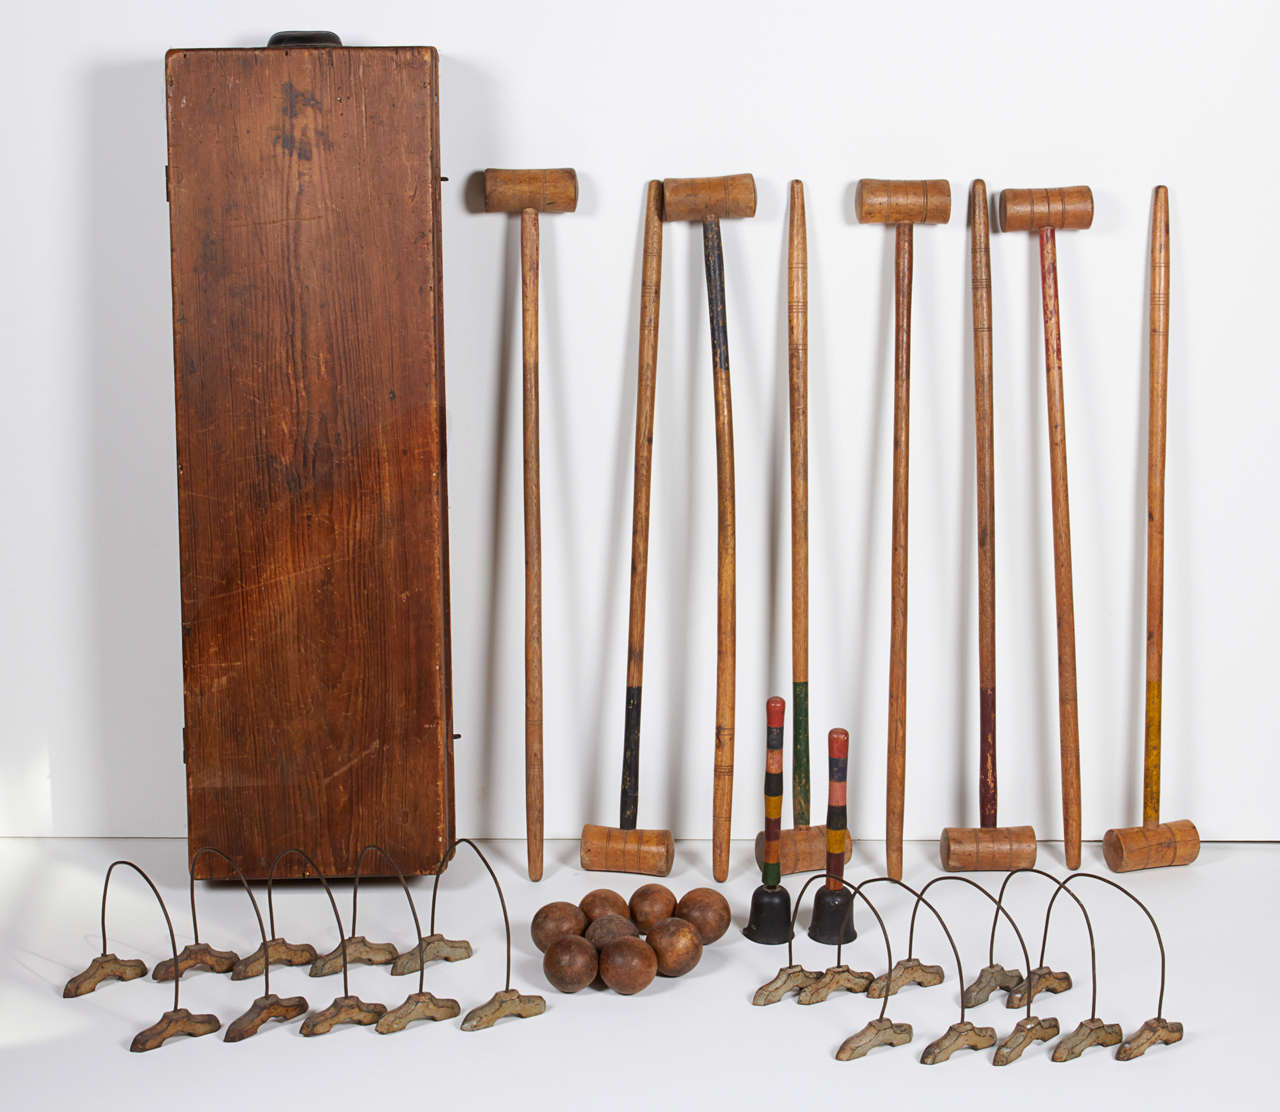 Late 19th century, indoor croquet set with case, two 10 inch end posts with cast iron weights, ten- 6